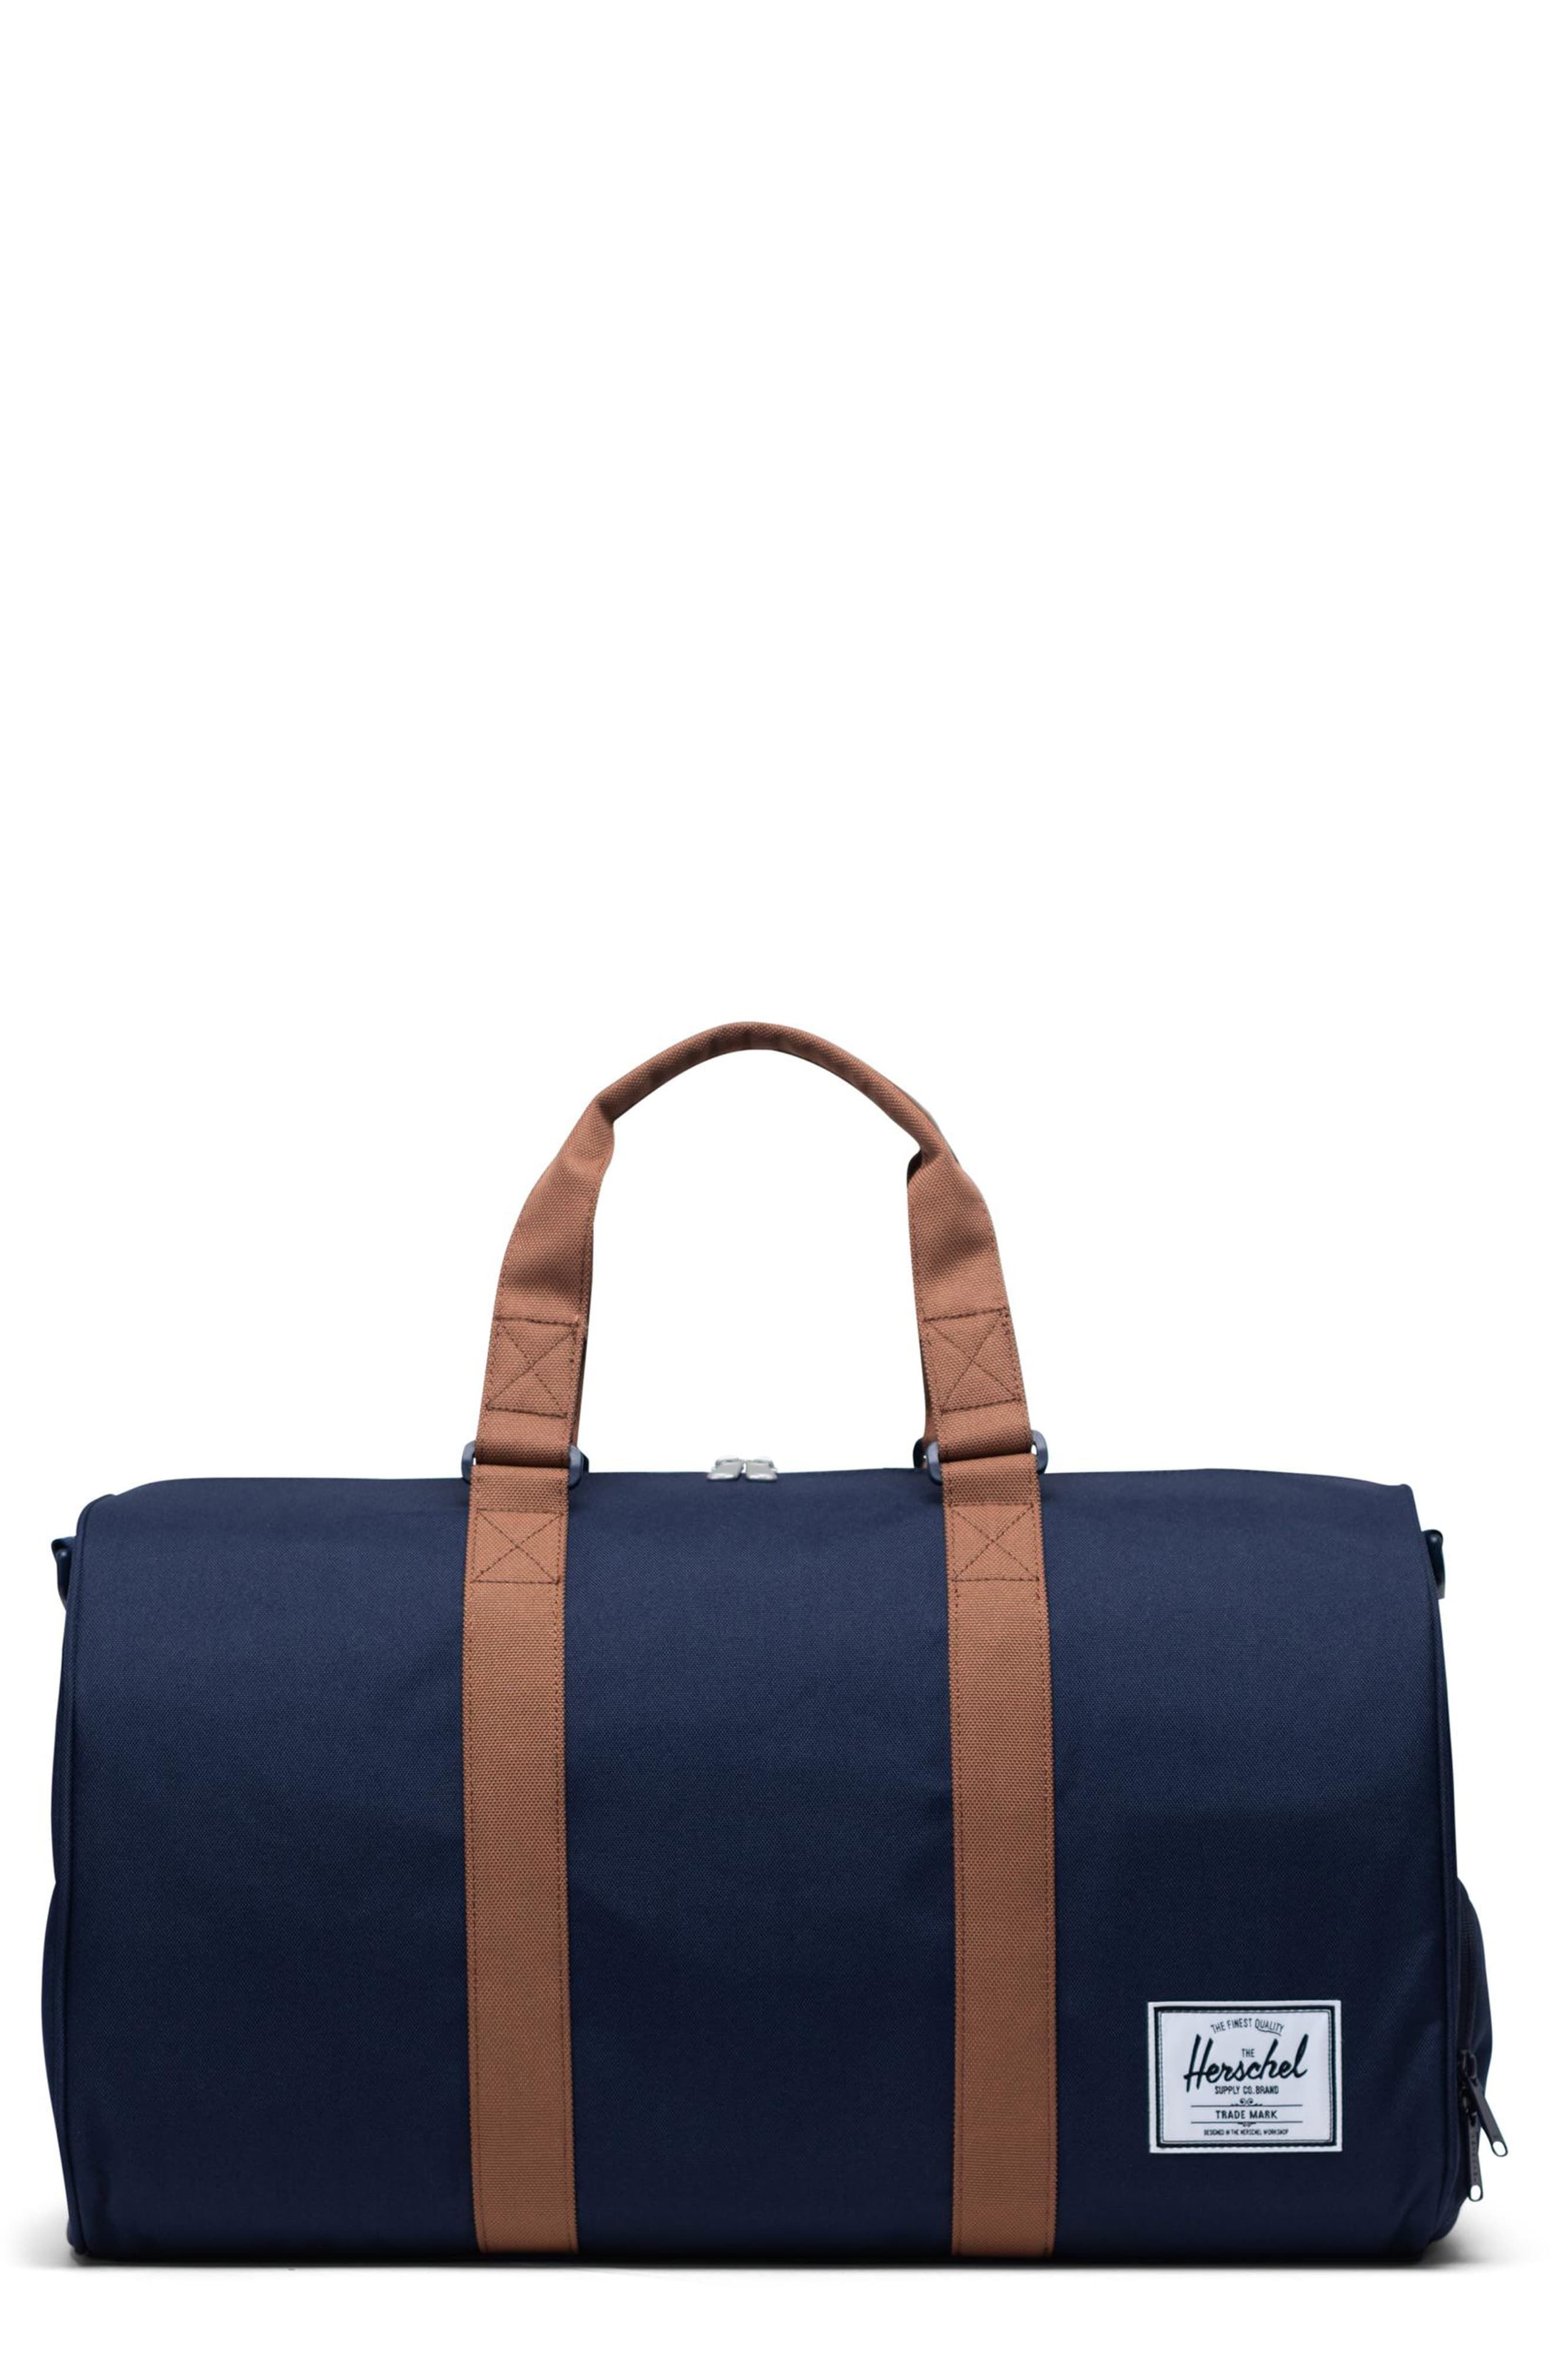 Navy Canvas Duffle Bag For Travel Gym Sports with Shoe Compartment 34L 